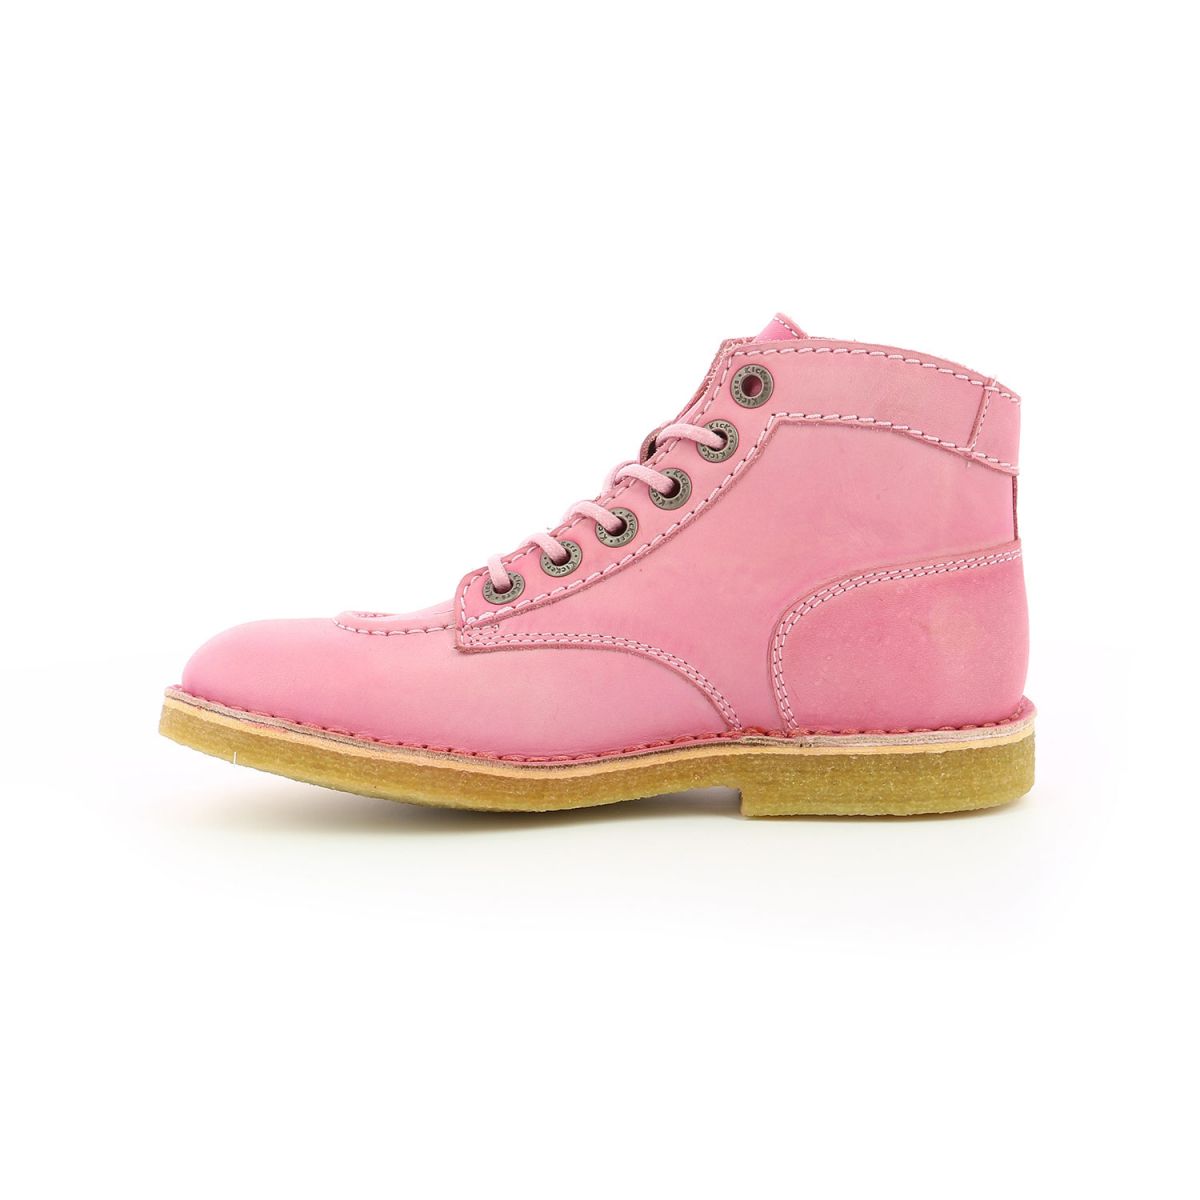 Misery Speak to Carelessness Women's boots Kick Legend pink - shoes for women - Kickers © Official